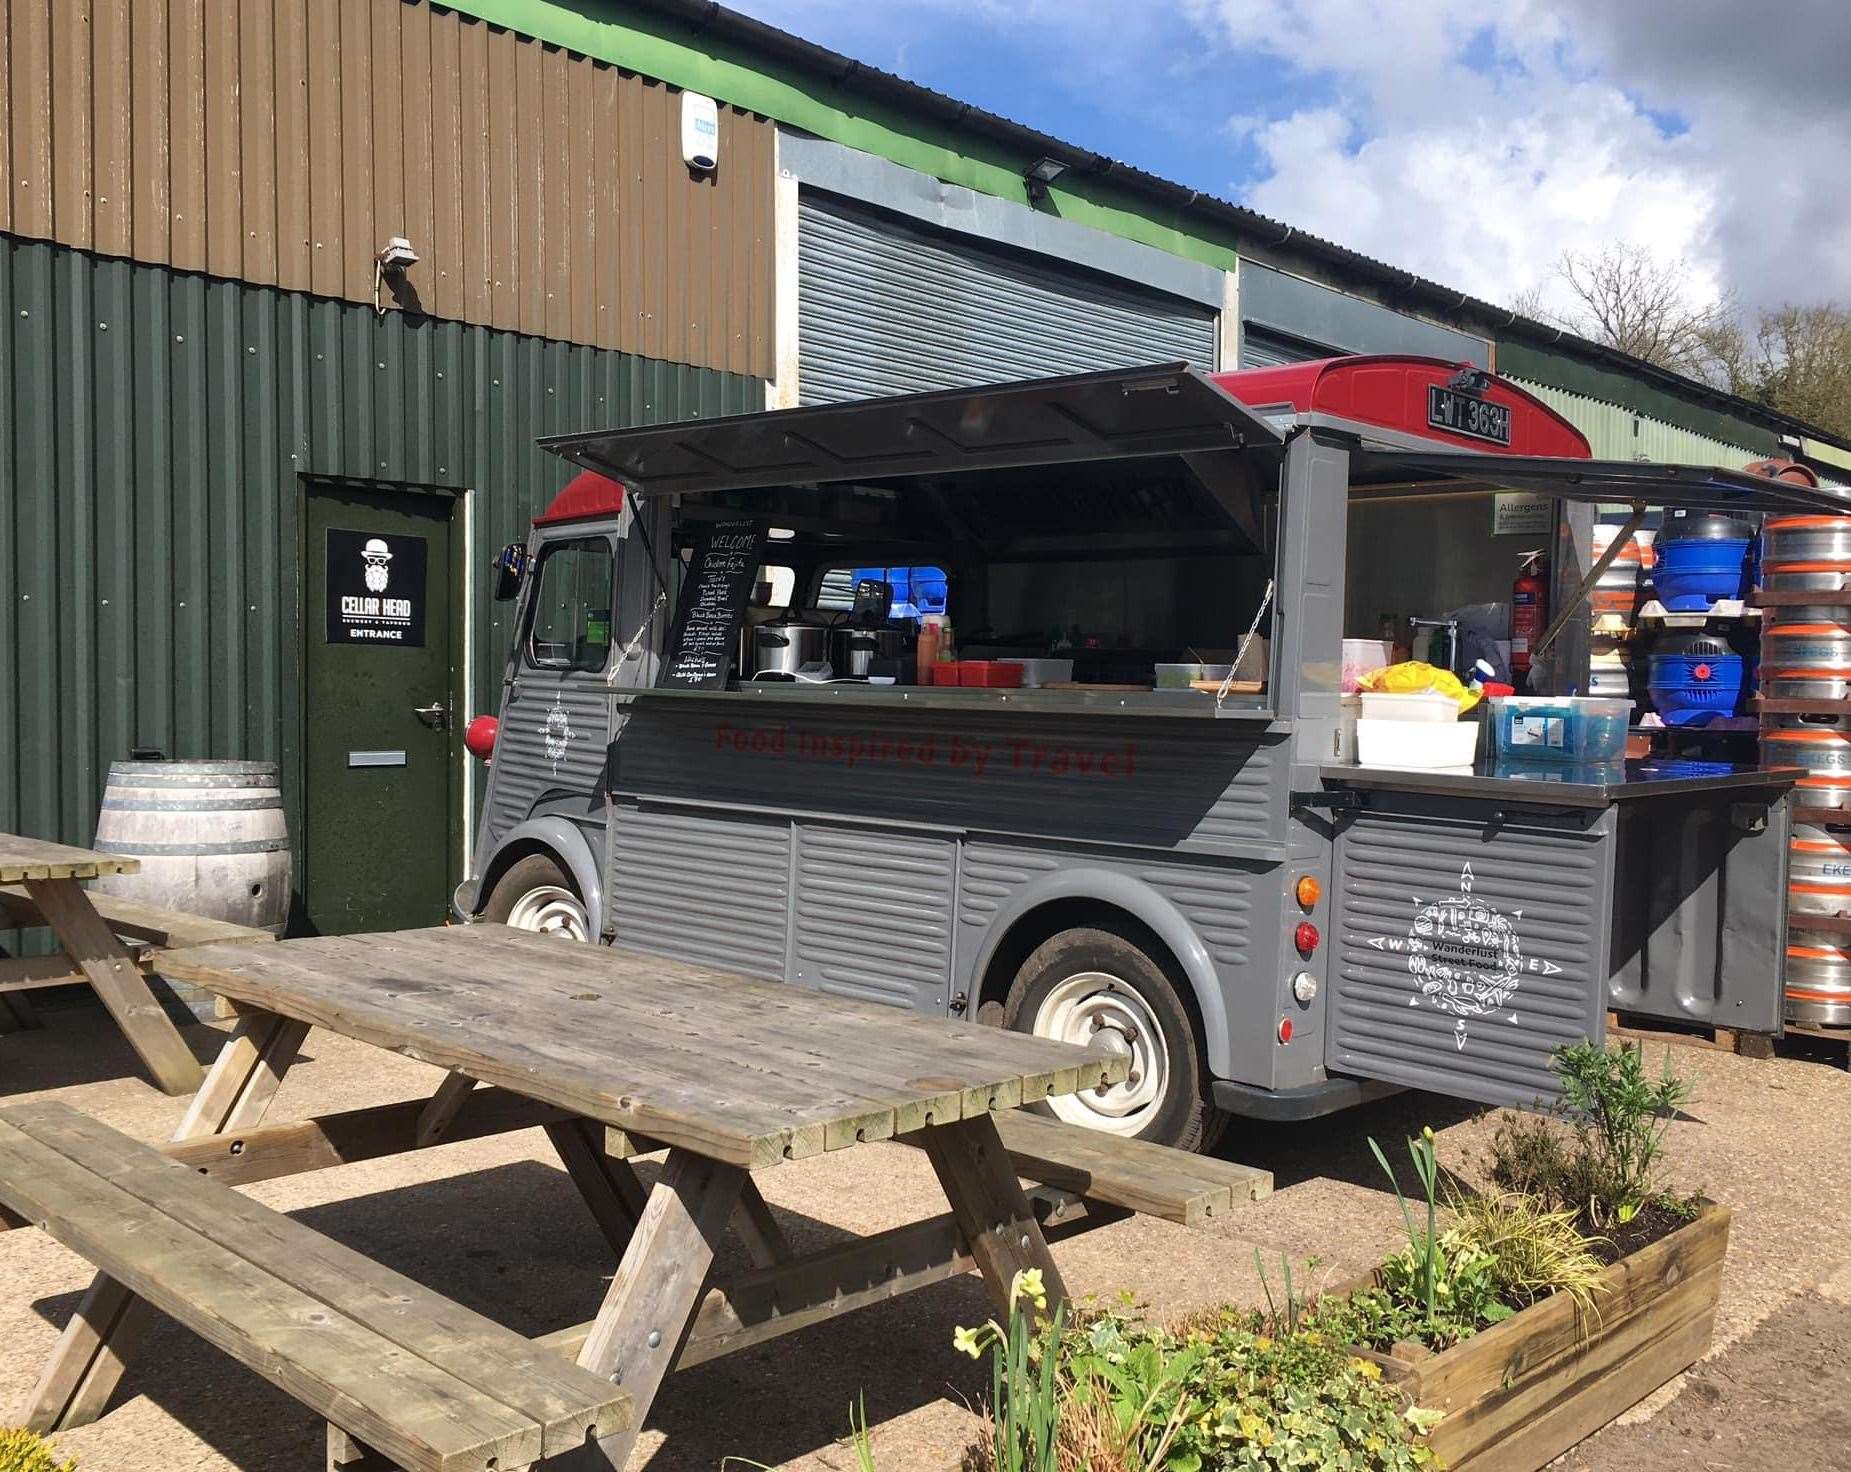 Wanderlust Street Food served customers at the taprooms during the Easter weekend before its closure. Photo: Wanderlust Street Food